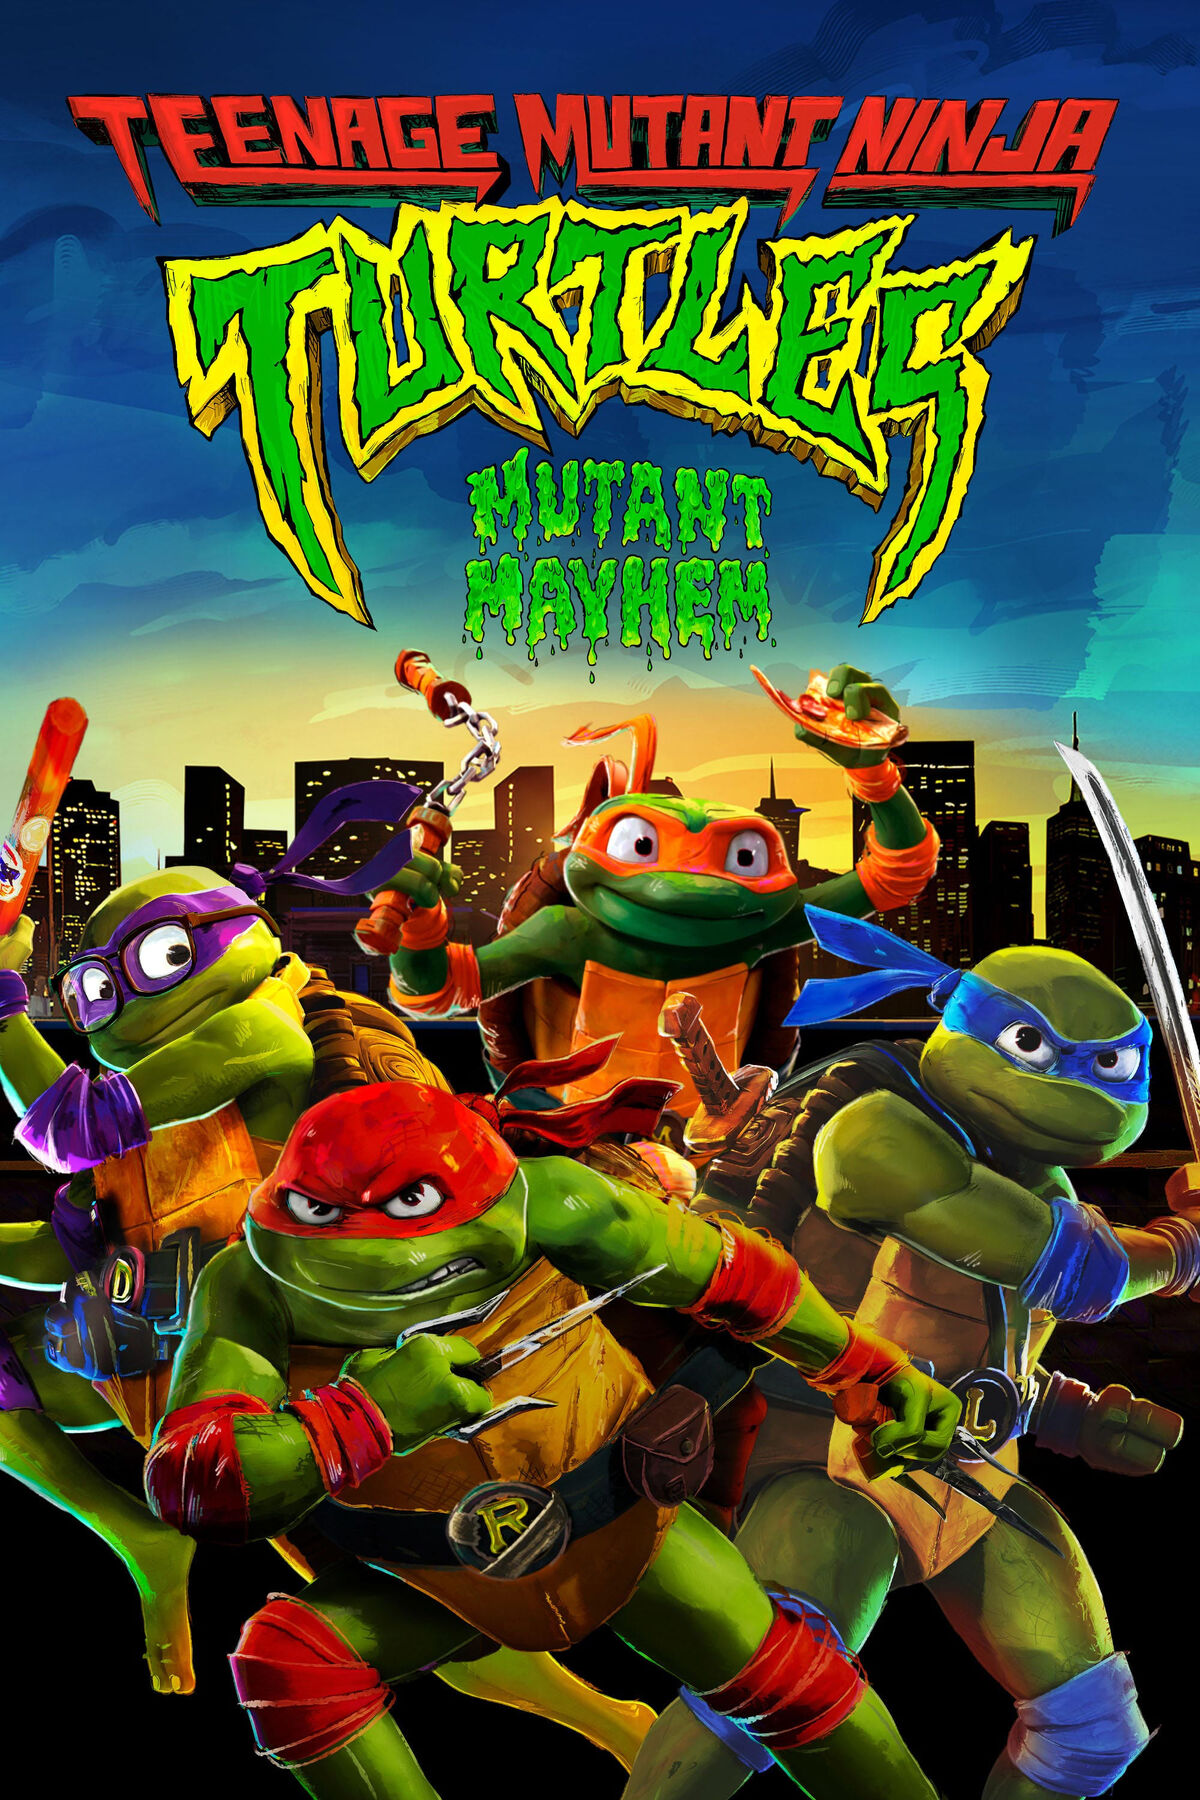 https://static.wikia.nocookie.net/international-entertainment-project/images/1/17/TMNT_Mutant_Mayhem_poster.jpeg/revision/latest/scale-to-width-down/1200?cb=20230923202022